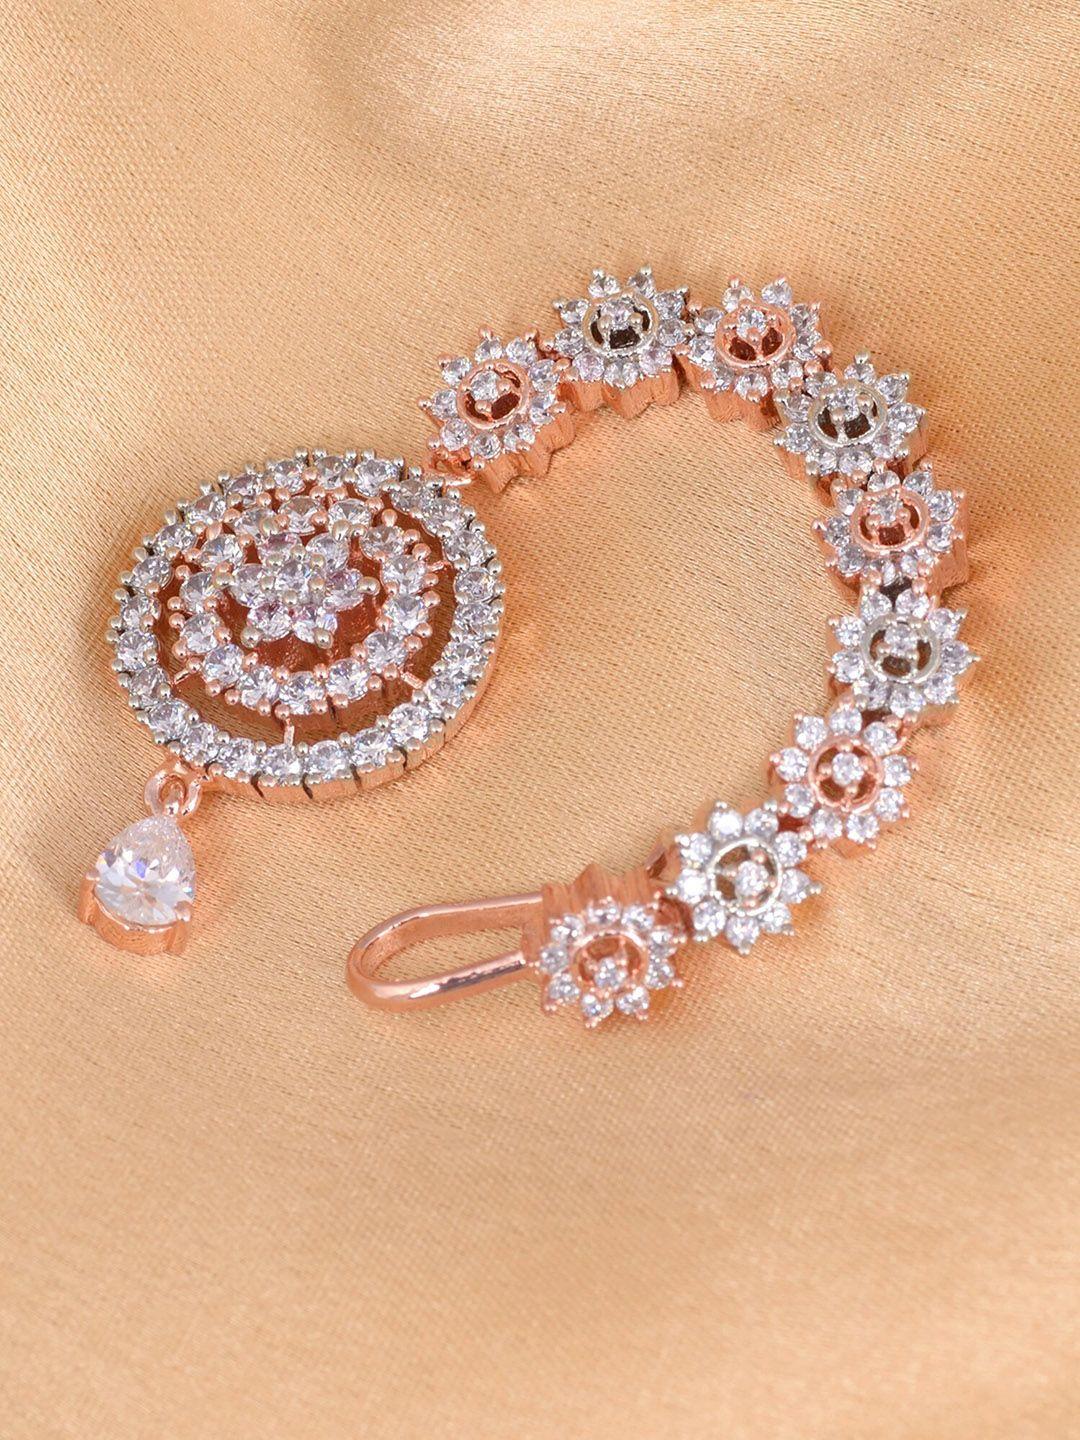 saraf rs jewellery rose gold-plated white ad & cz-studded handcrafted jadau maang tikka